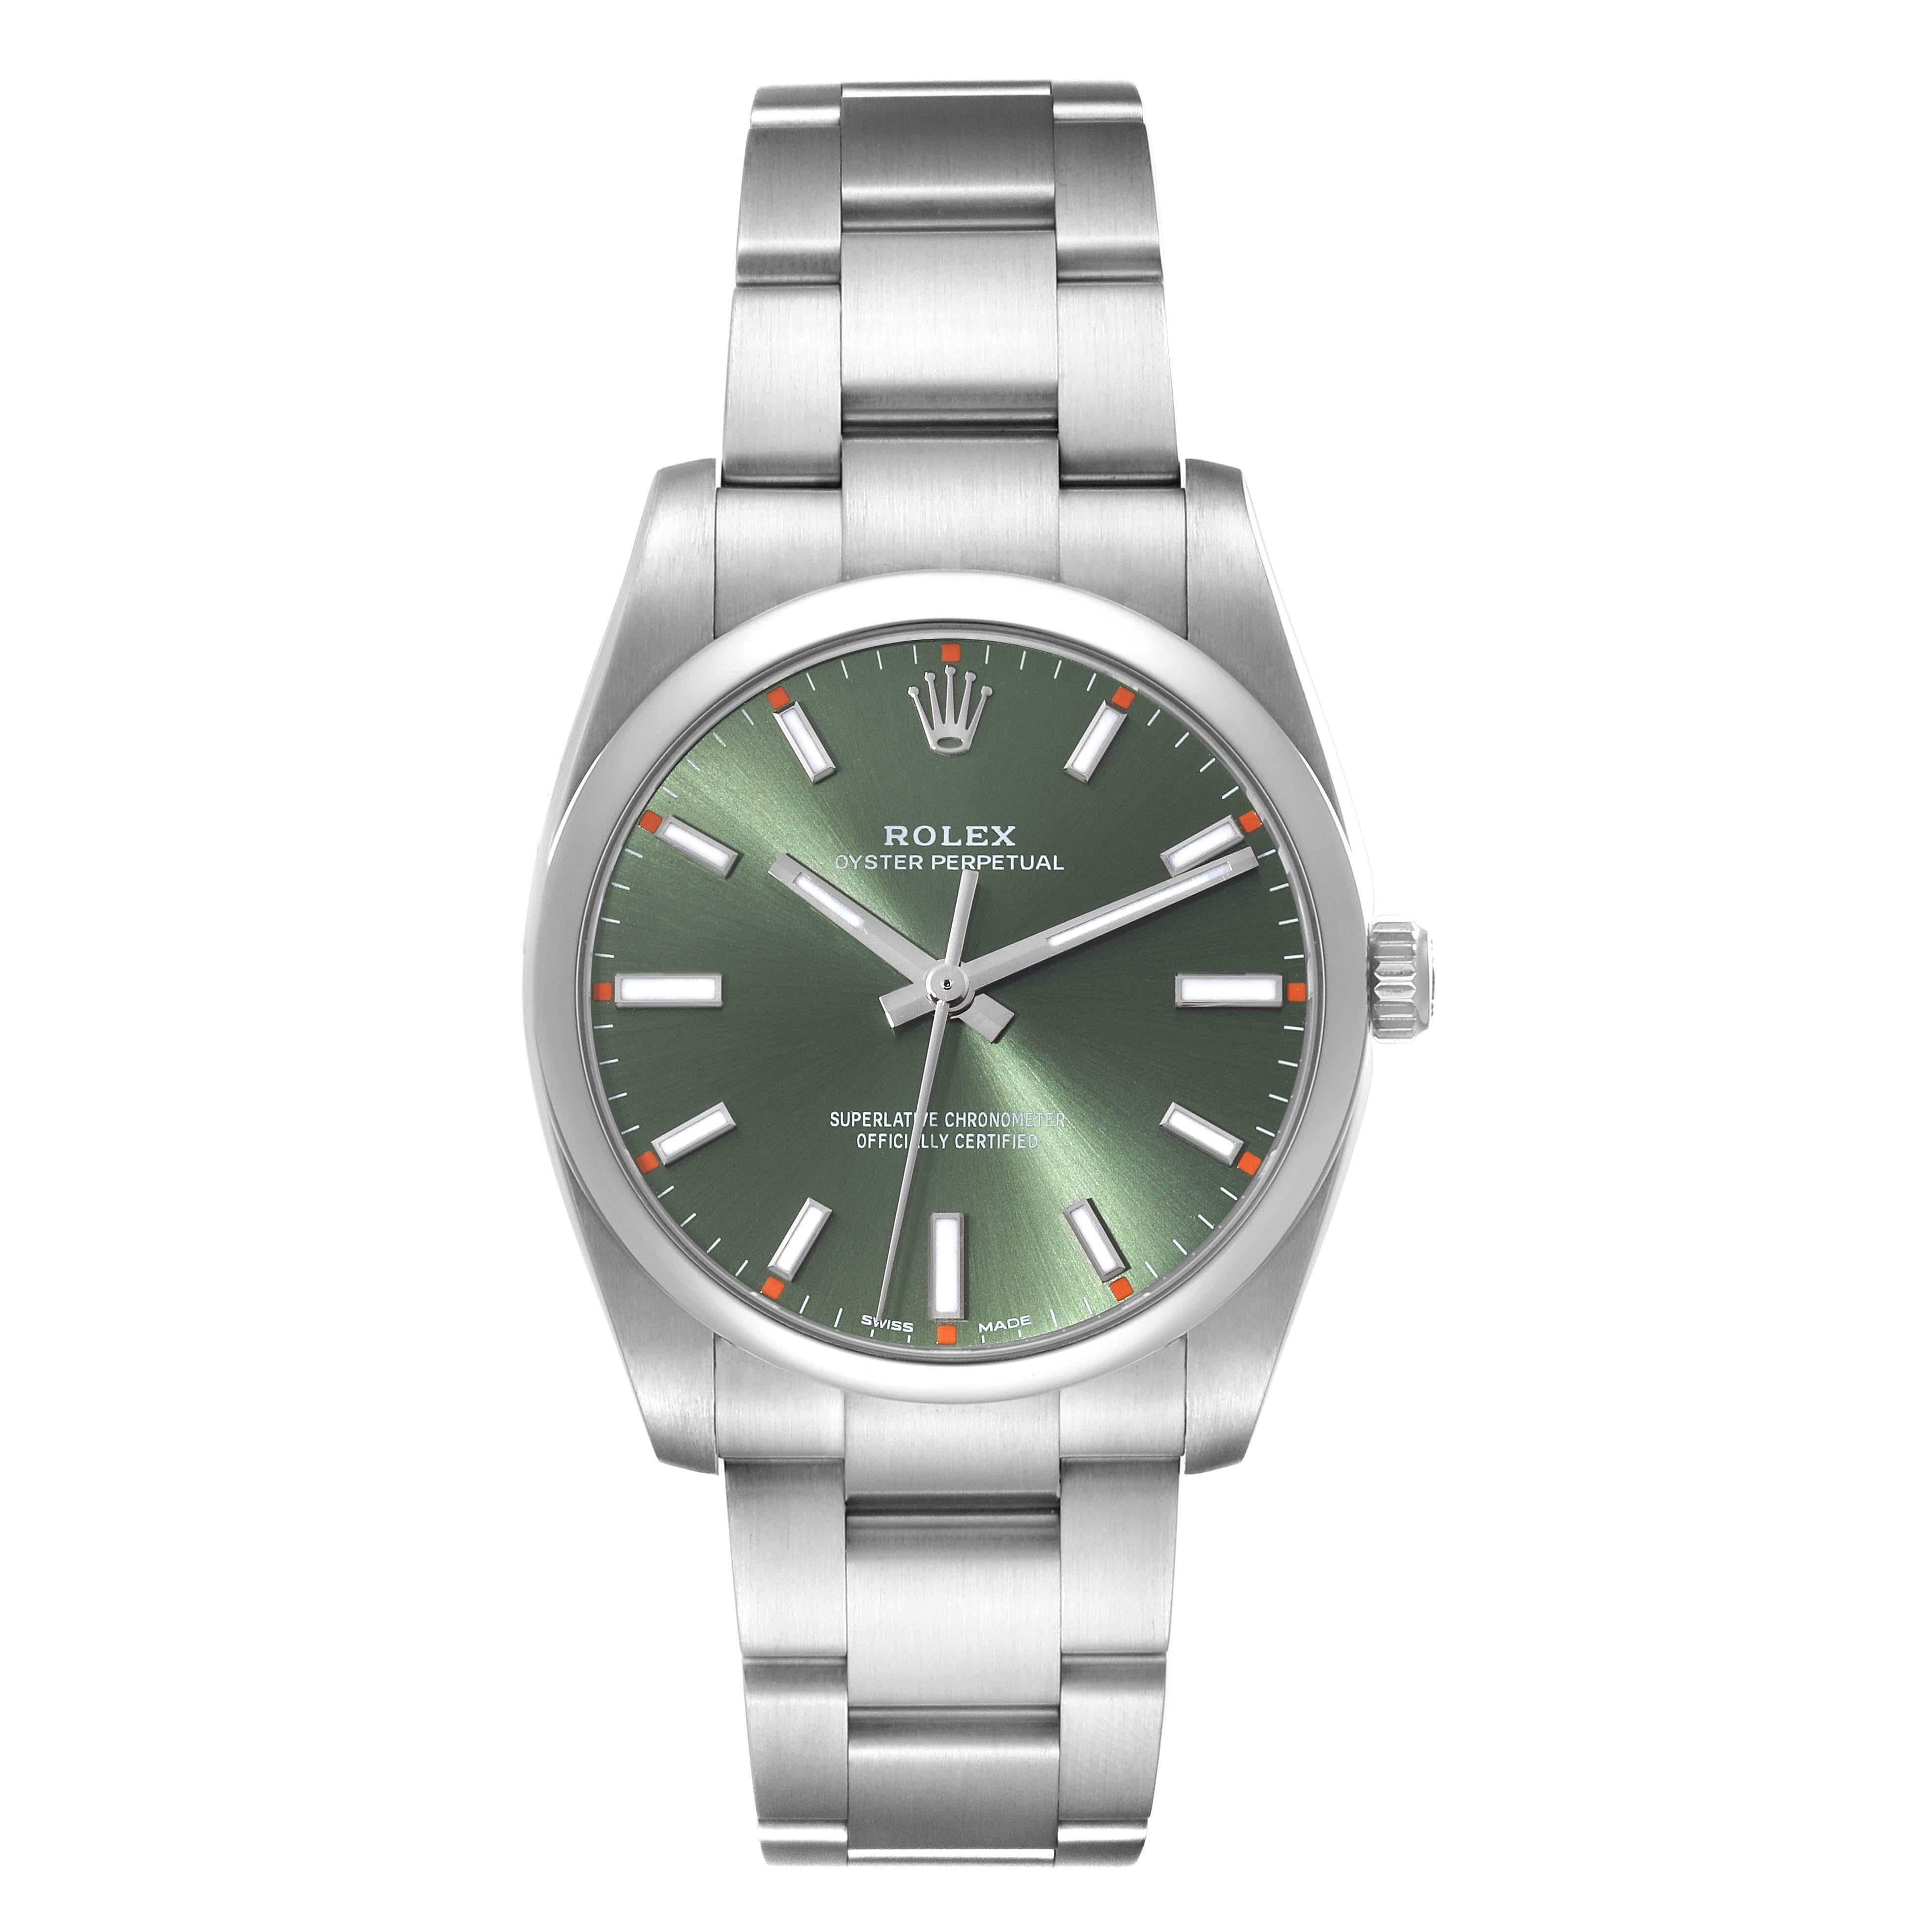 Rolex Oyster Perpetual Olive Green Dial Steel Mens Watch 114200. Officially certified chronometer automatic self-winding movement. Stainless steel case 34.0 mm in diameter.  Rolex logo on the crown. Stainless steel smooth domed bezel. Scratch